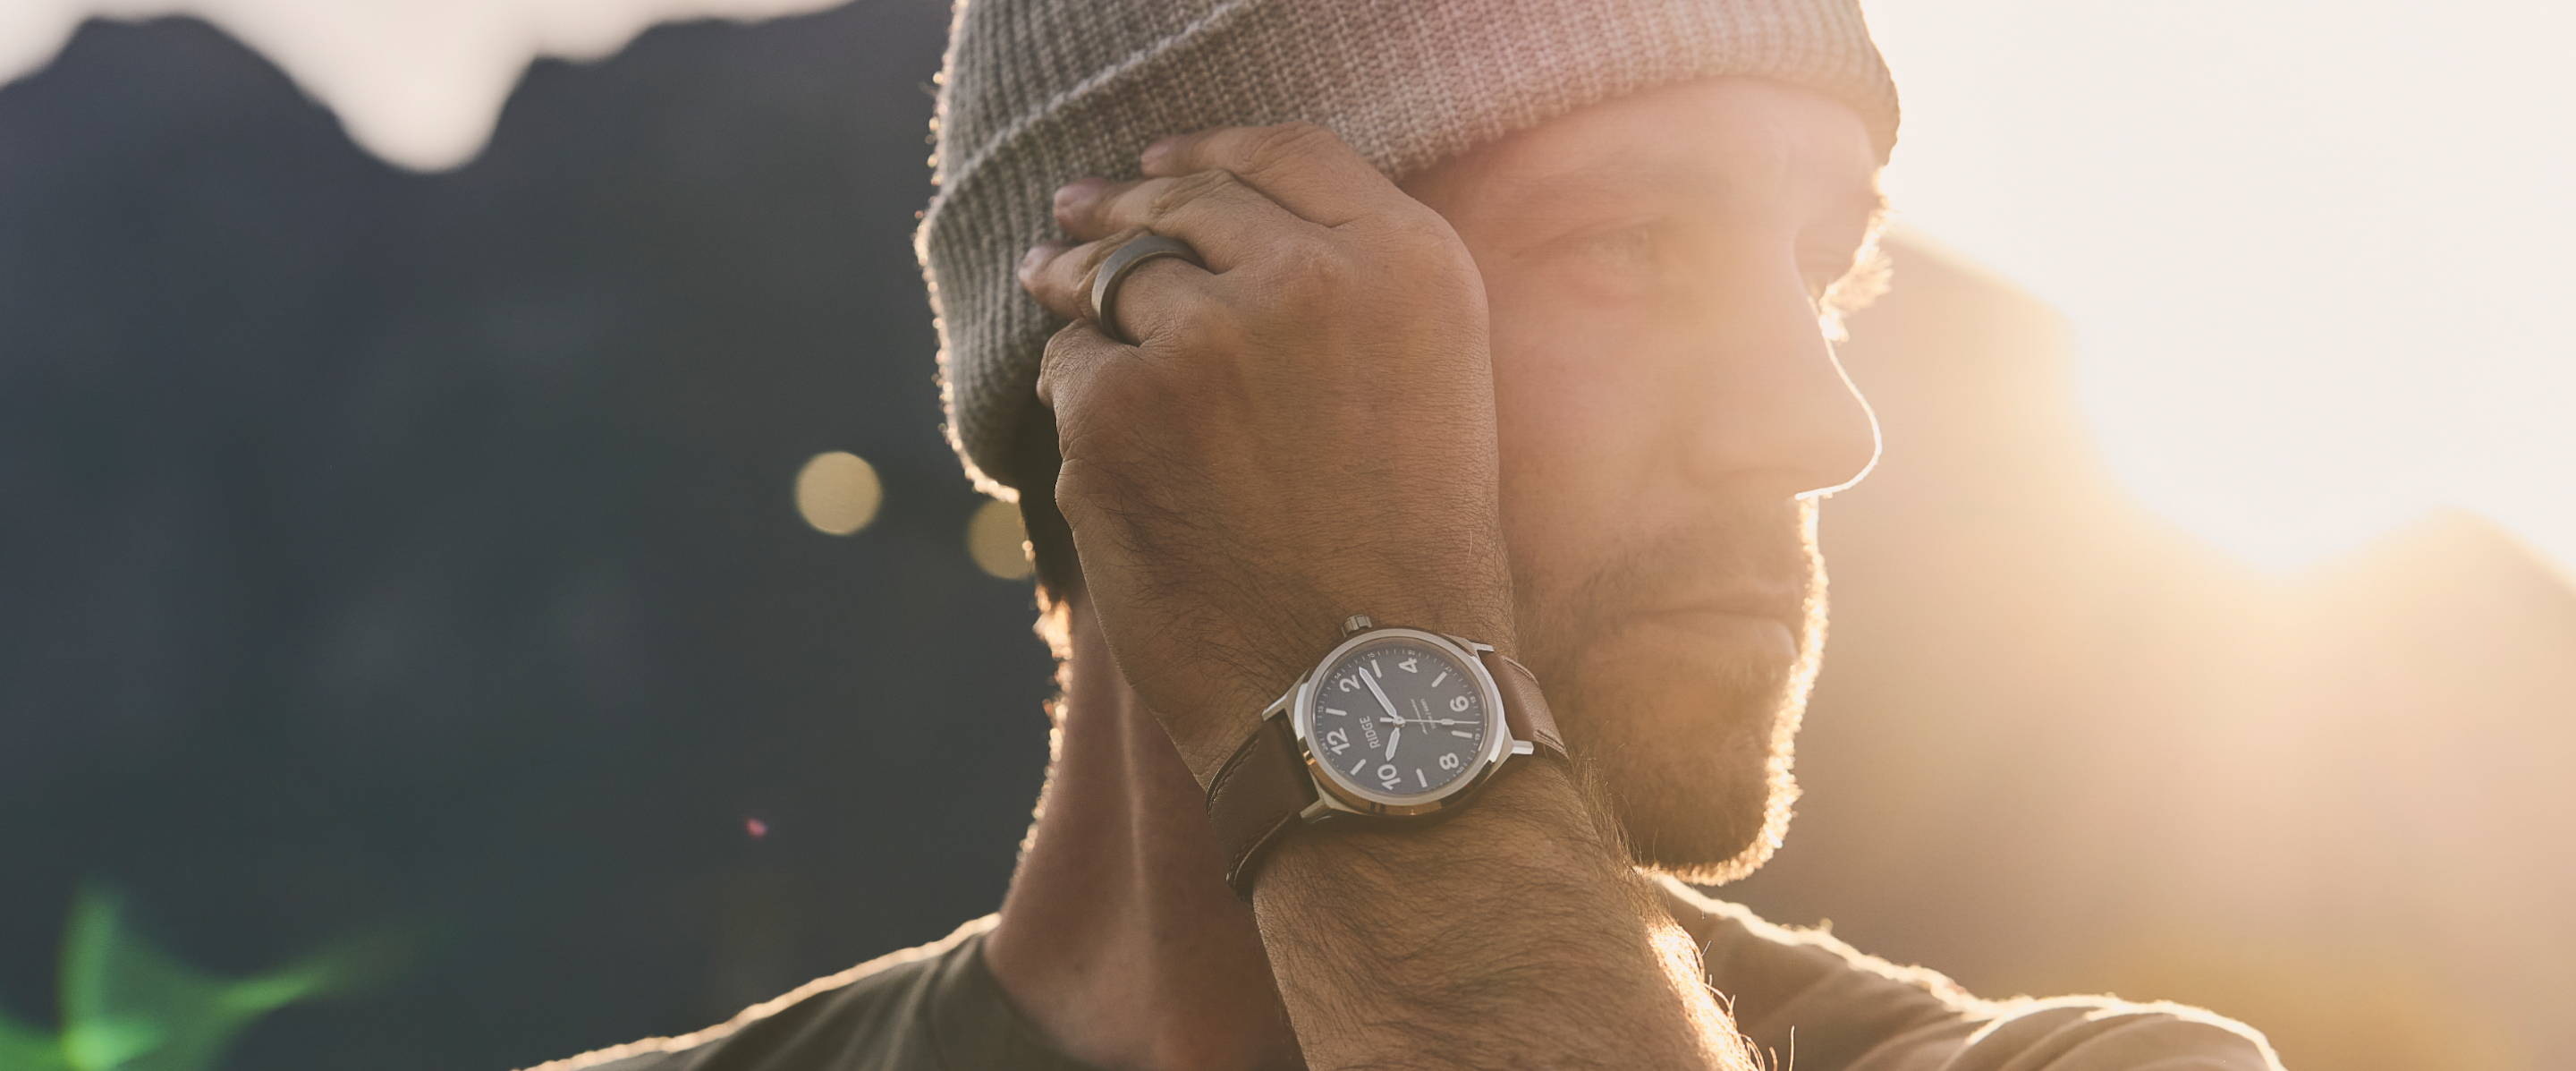 man fixing his bennie while showing his Ridge Field Watch